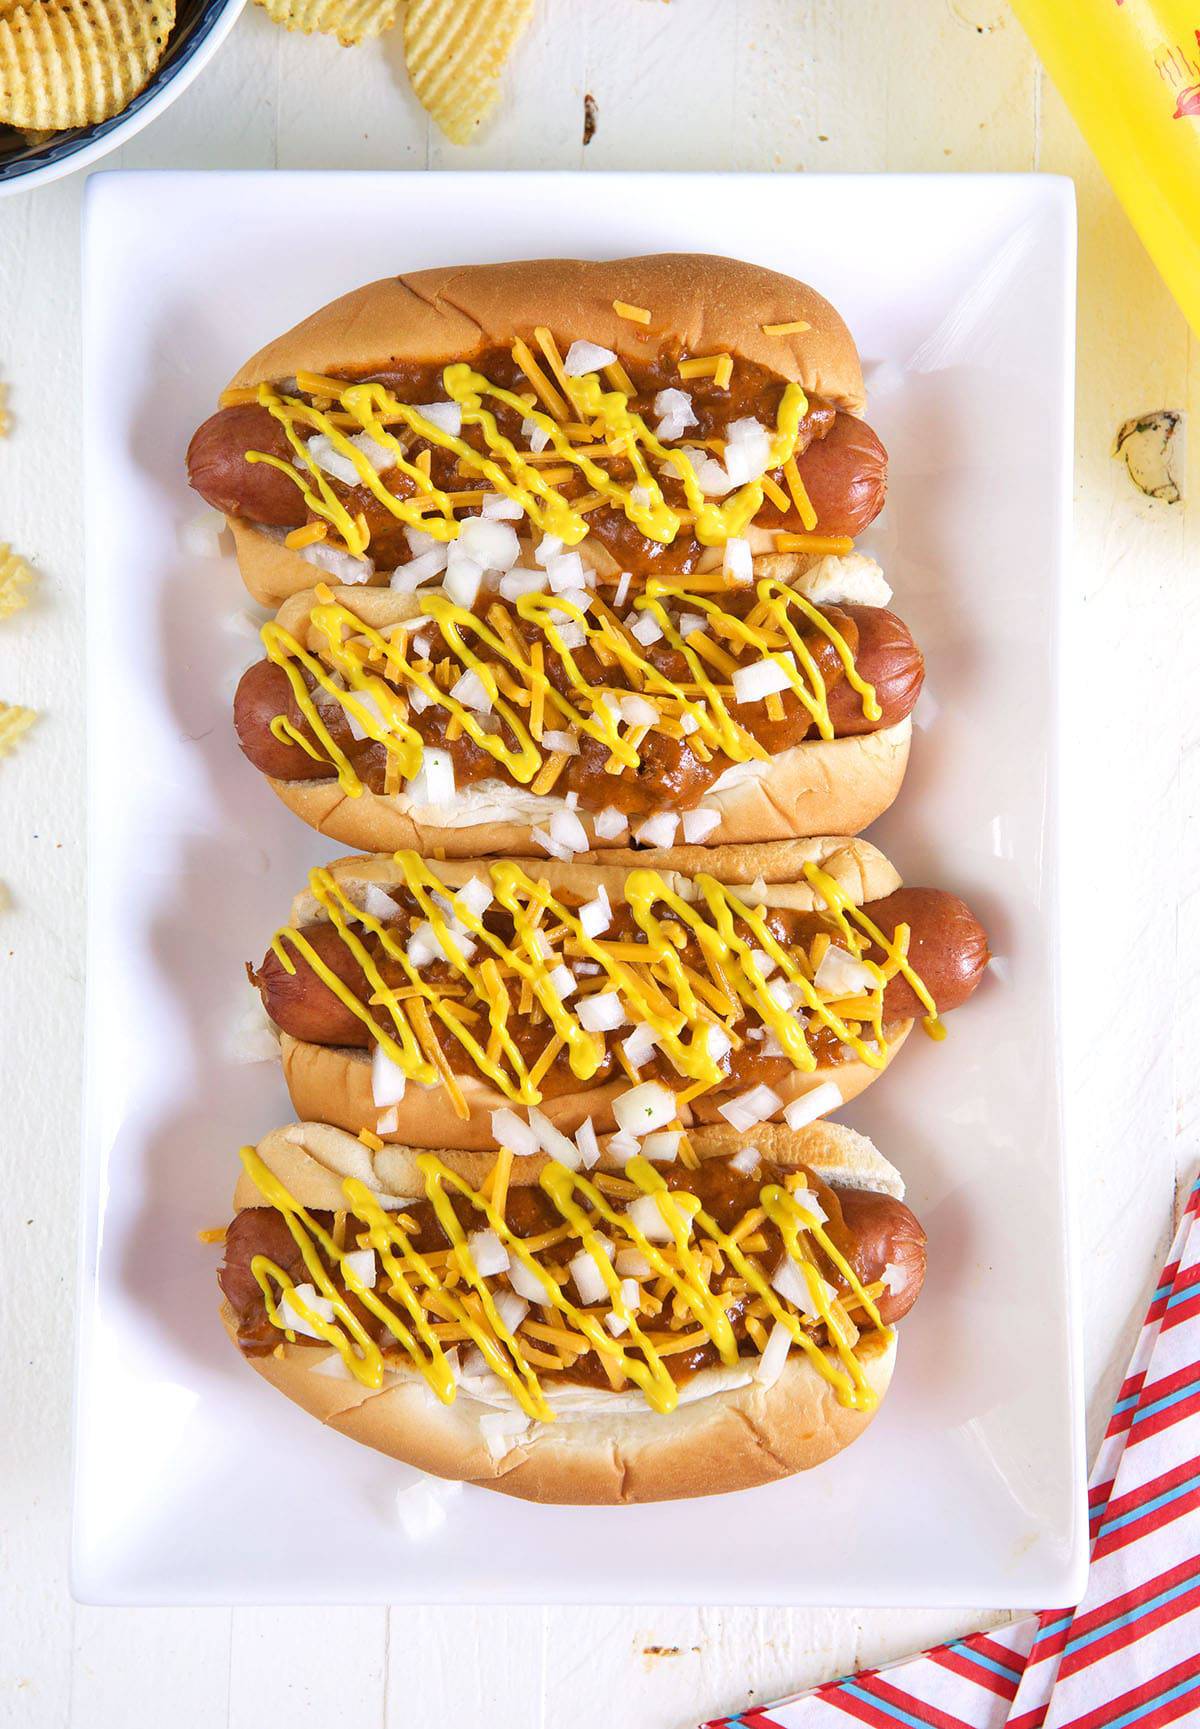 Four hot dogs are placed on a white rectangular plate. 